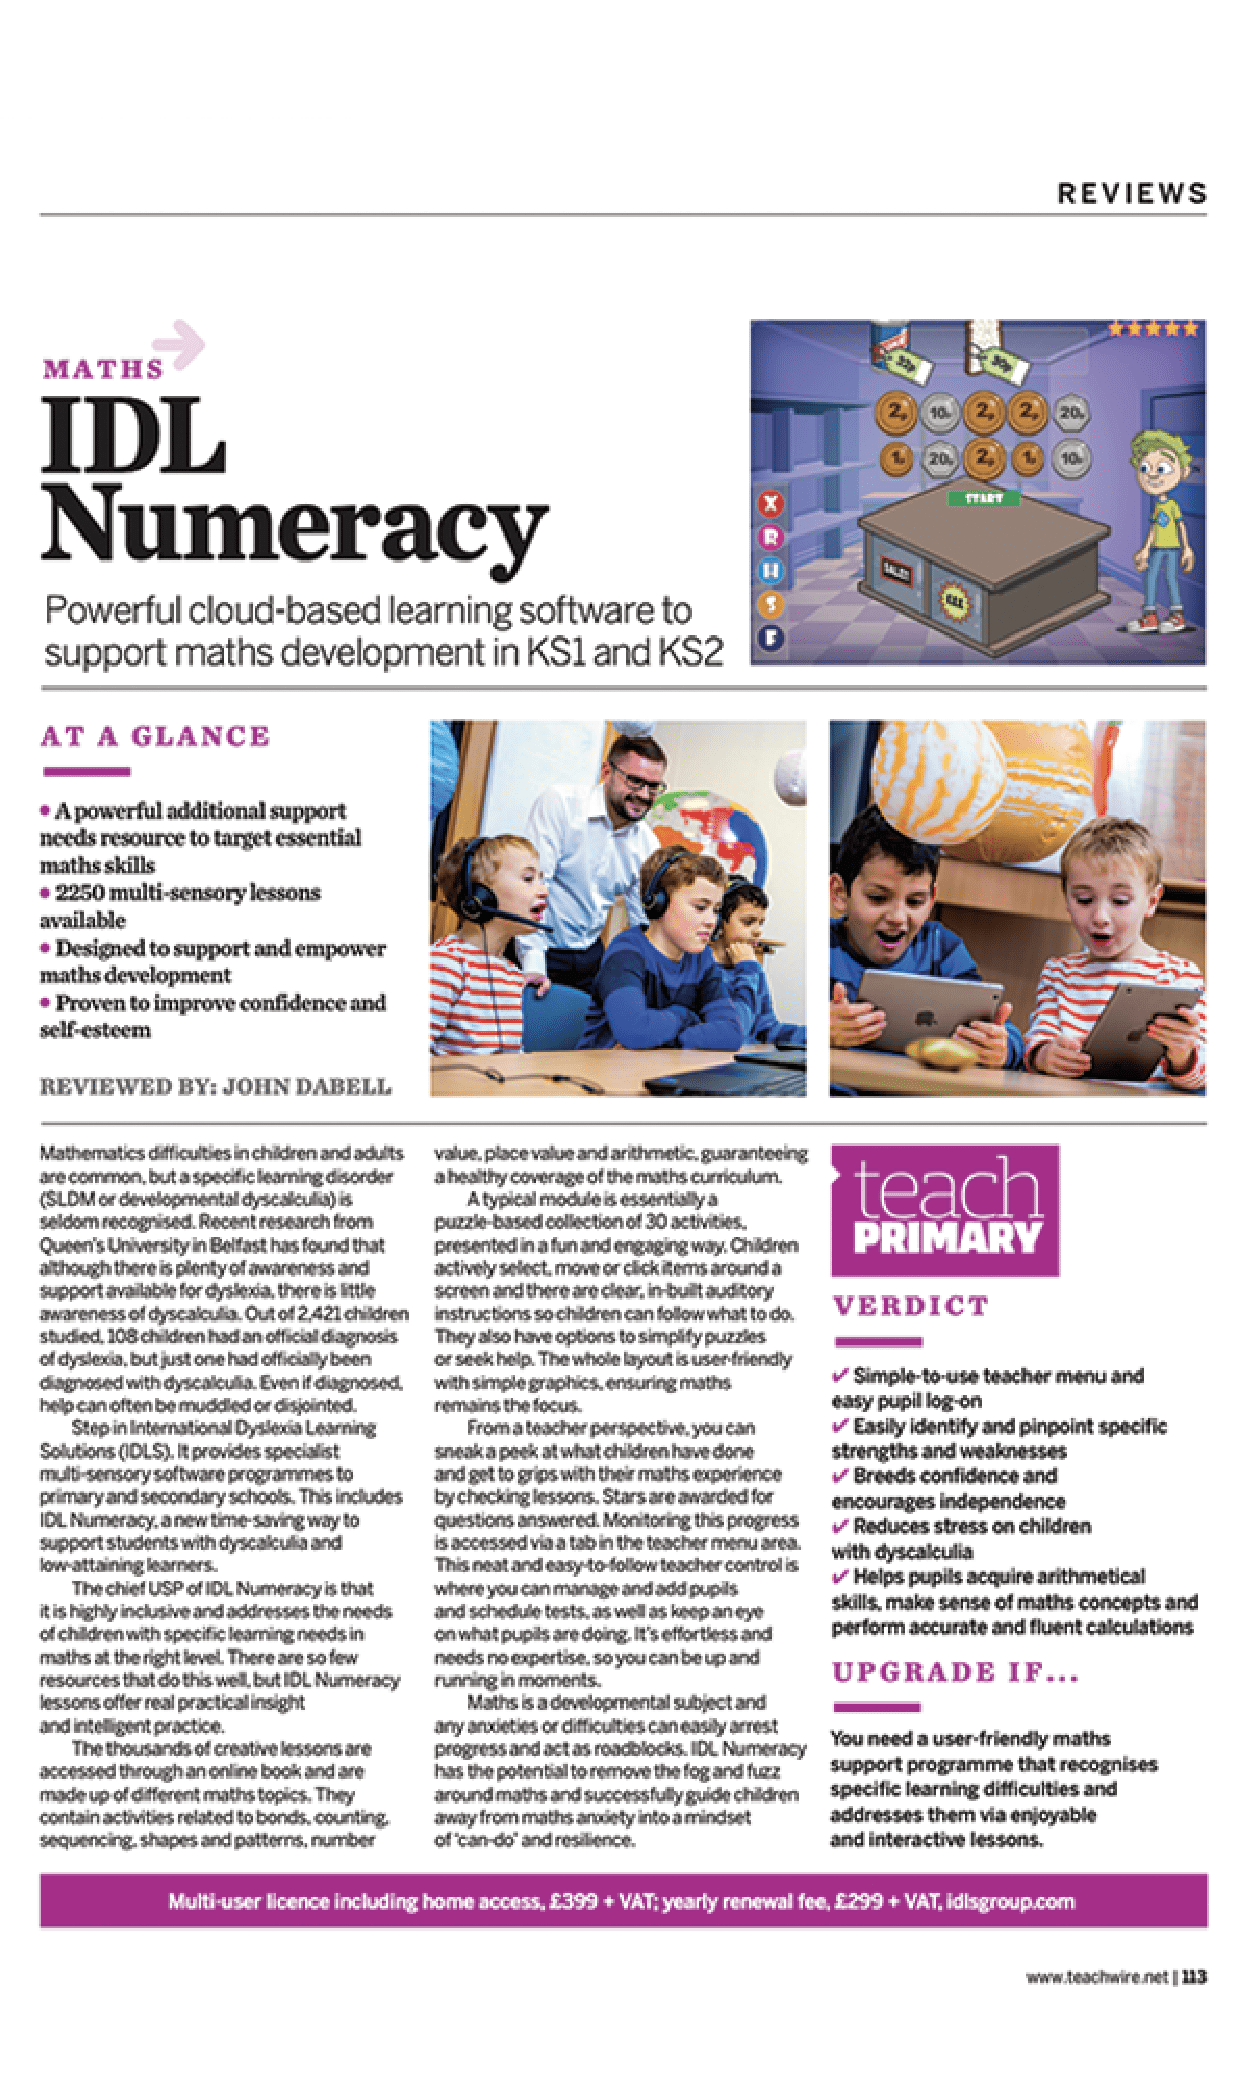 IDL Numeracy - Teach Primary Review